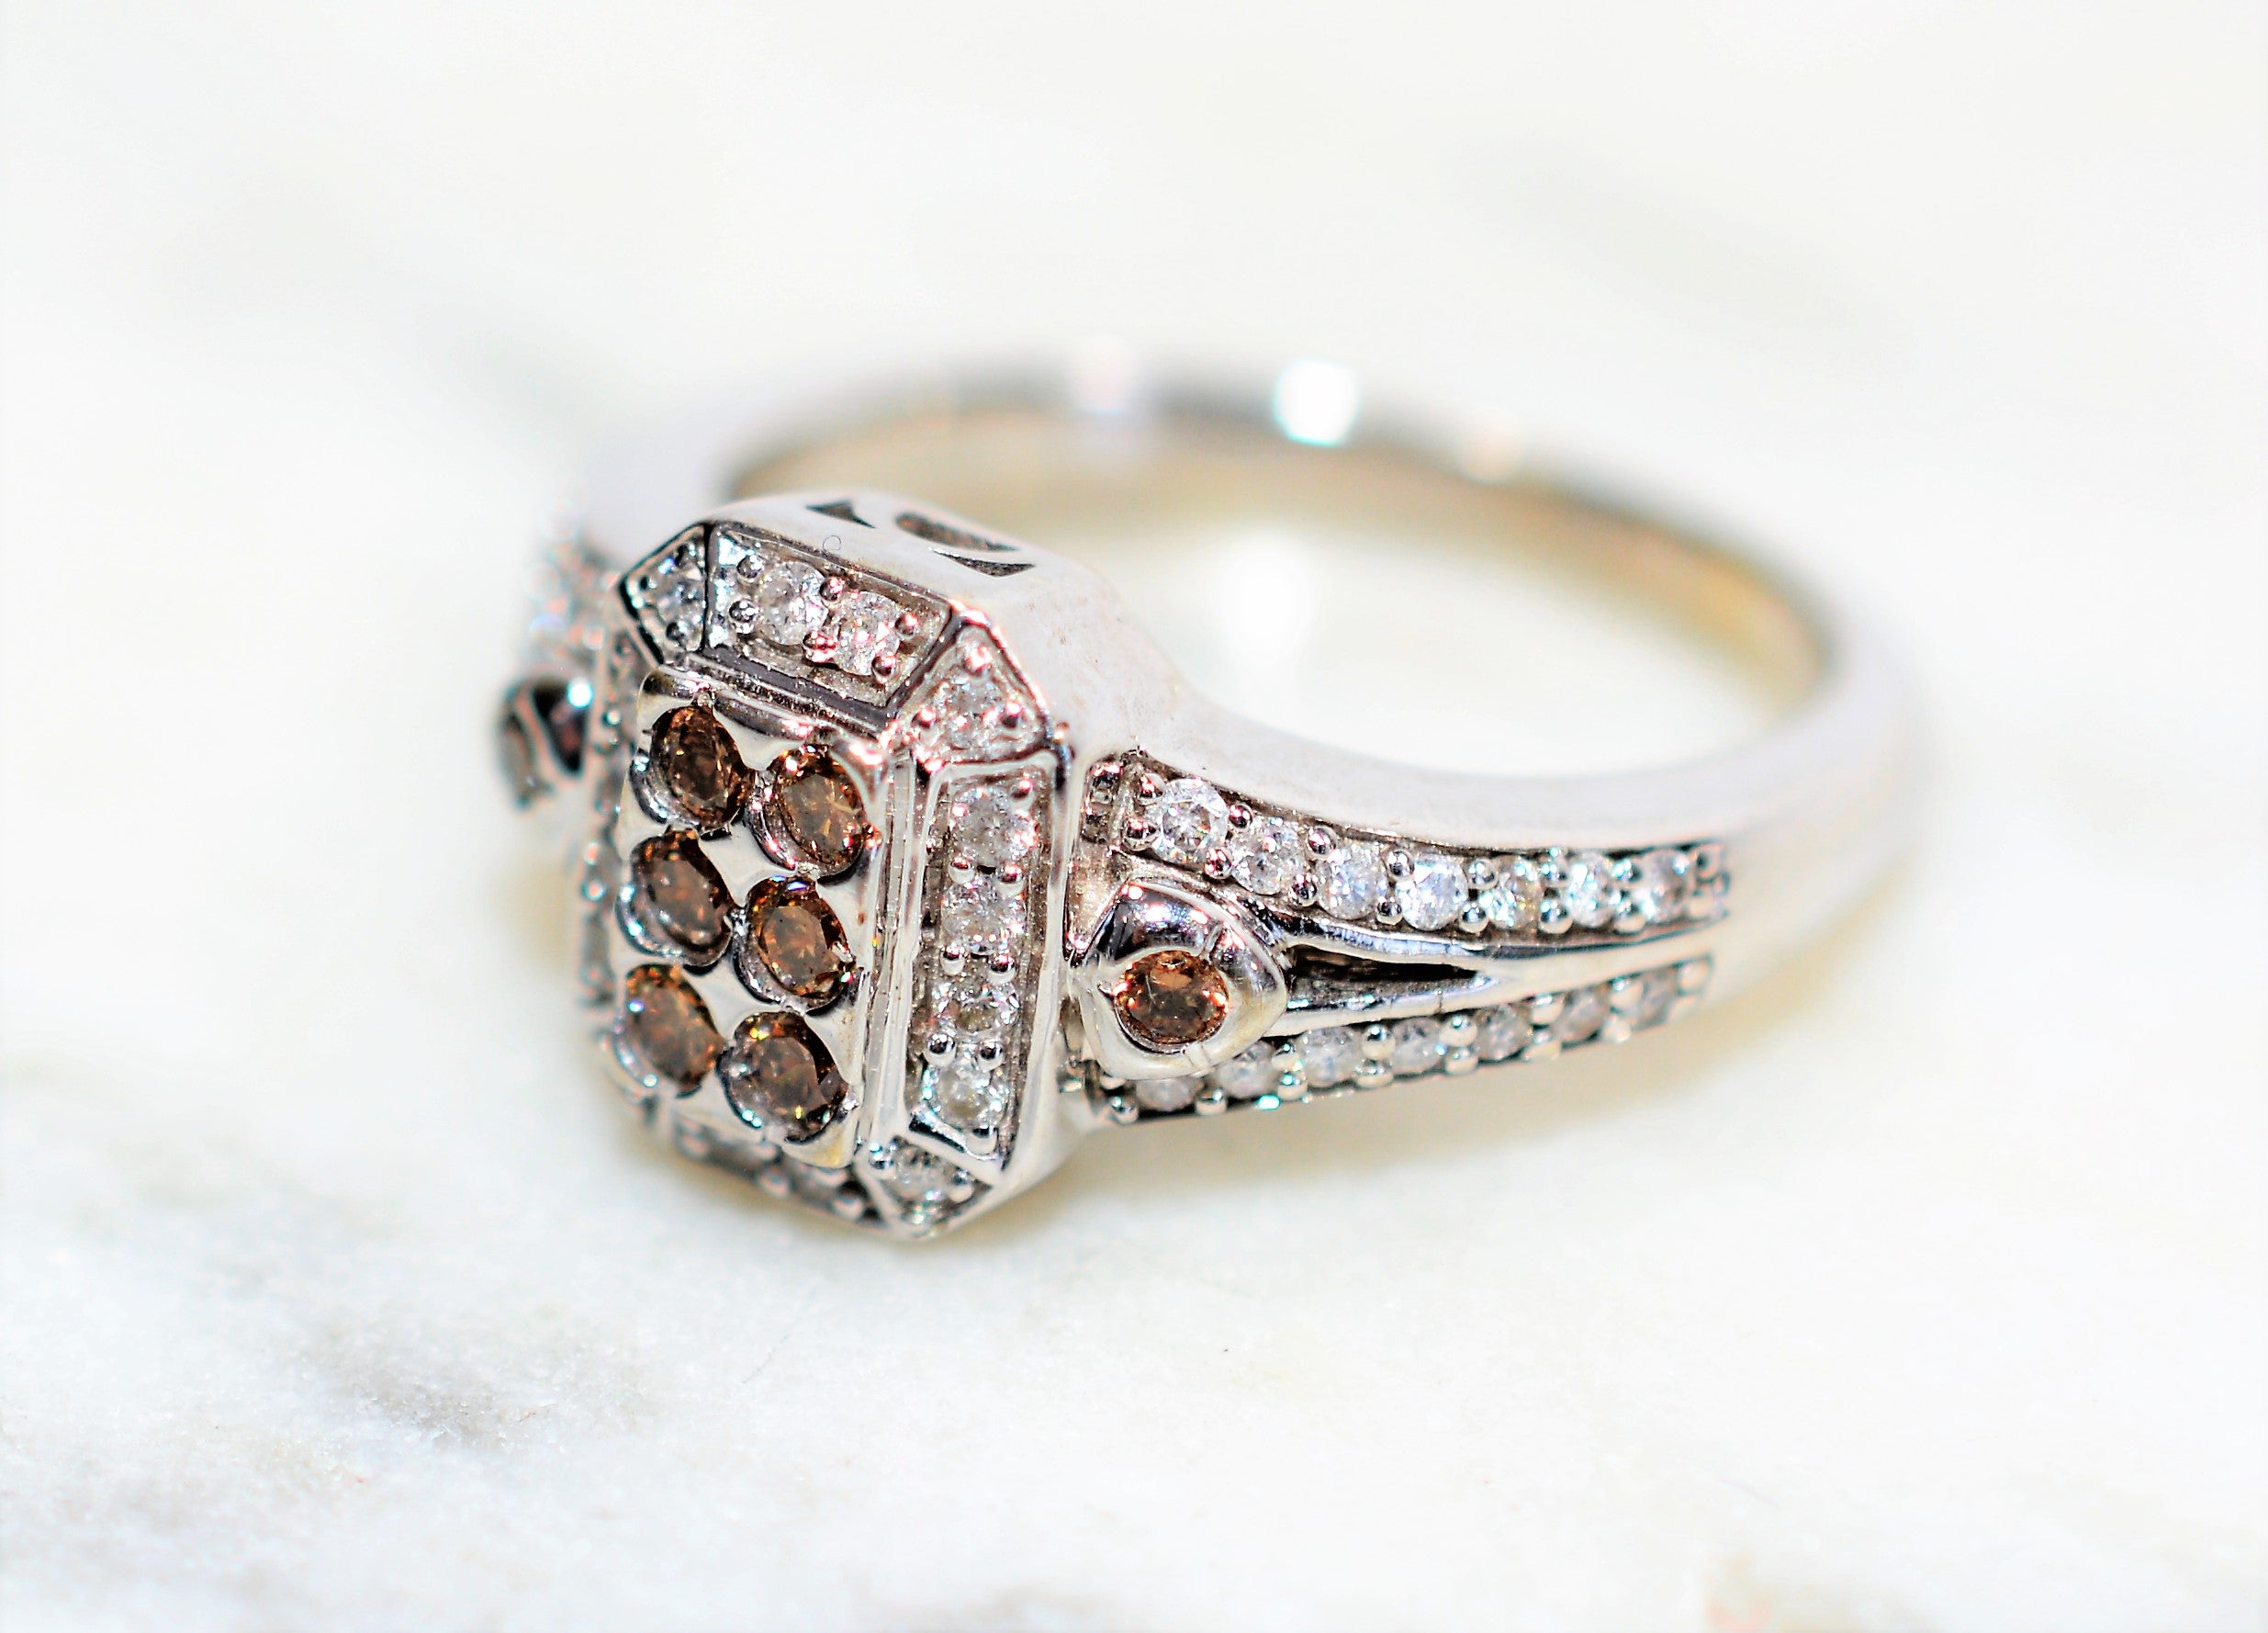 Natural Fancy Chocolate Diamond Ring 14K Solid White Gold .46tcw Cluster Ring Engagement Ring Cocktail Ring Designer Ring Estate Womens Ring